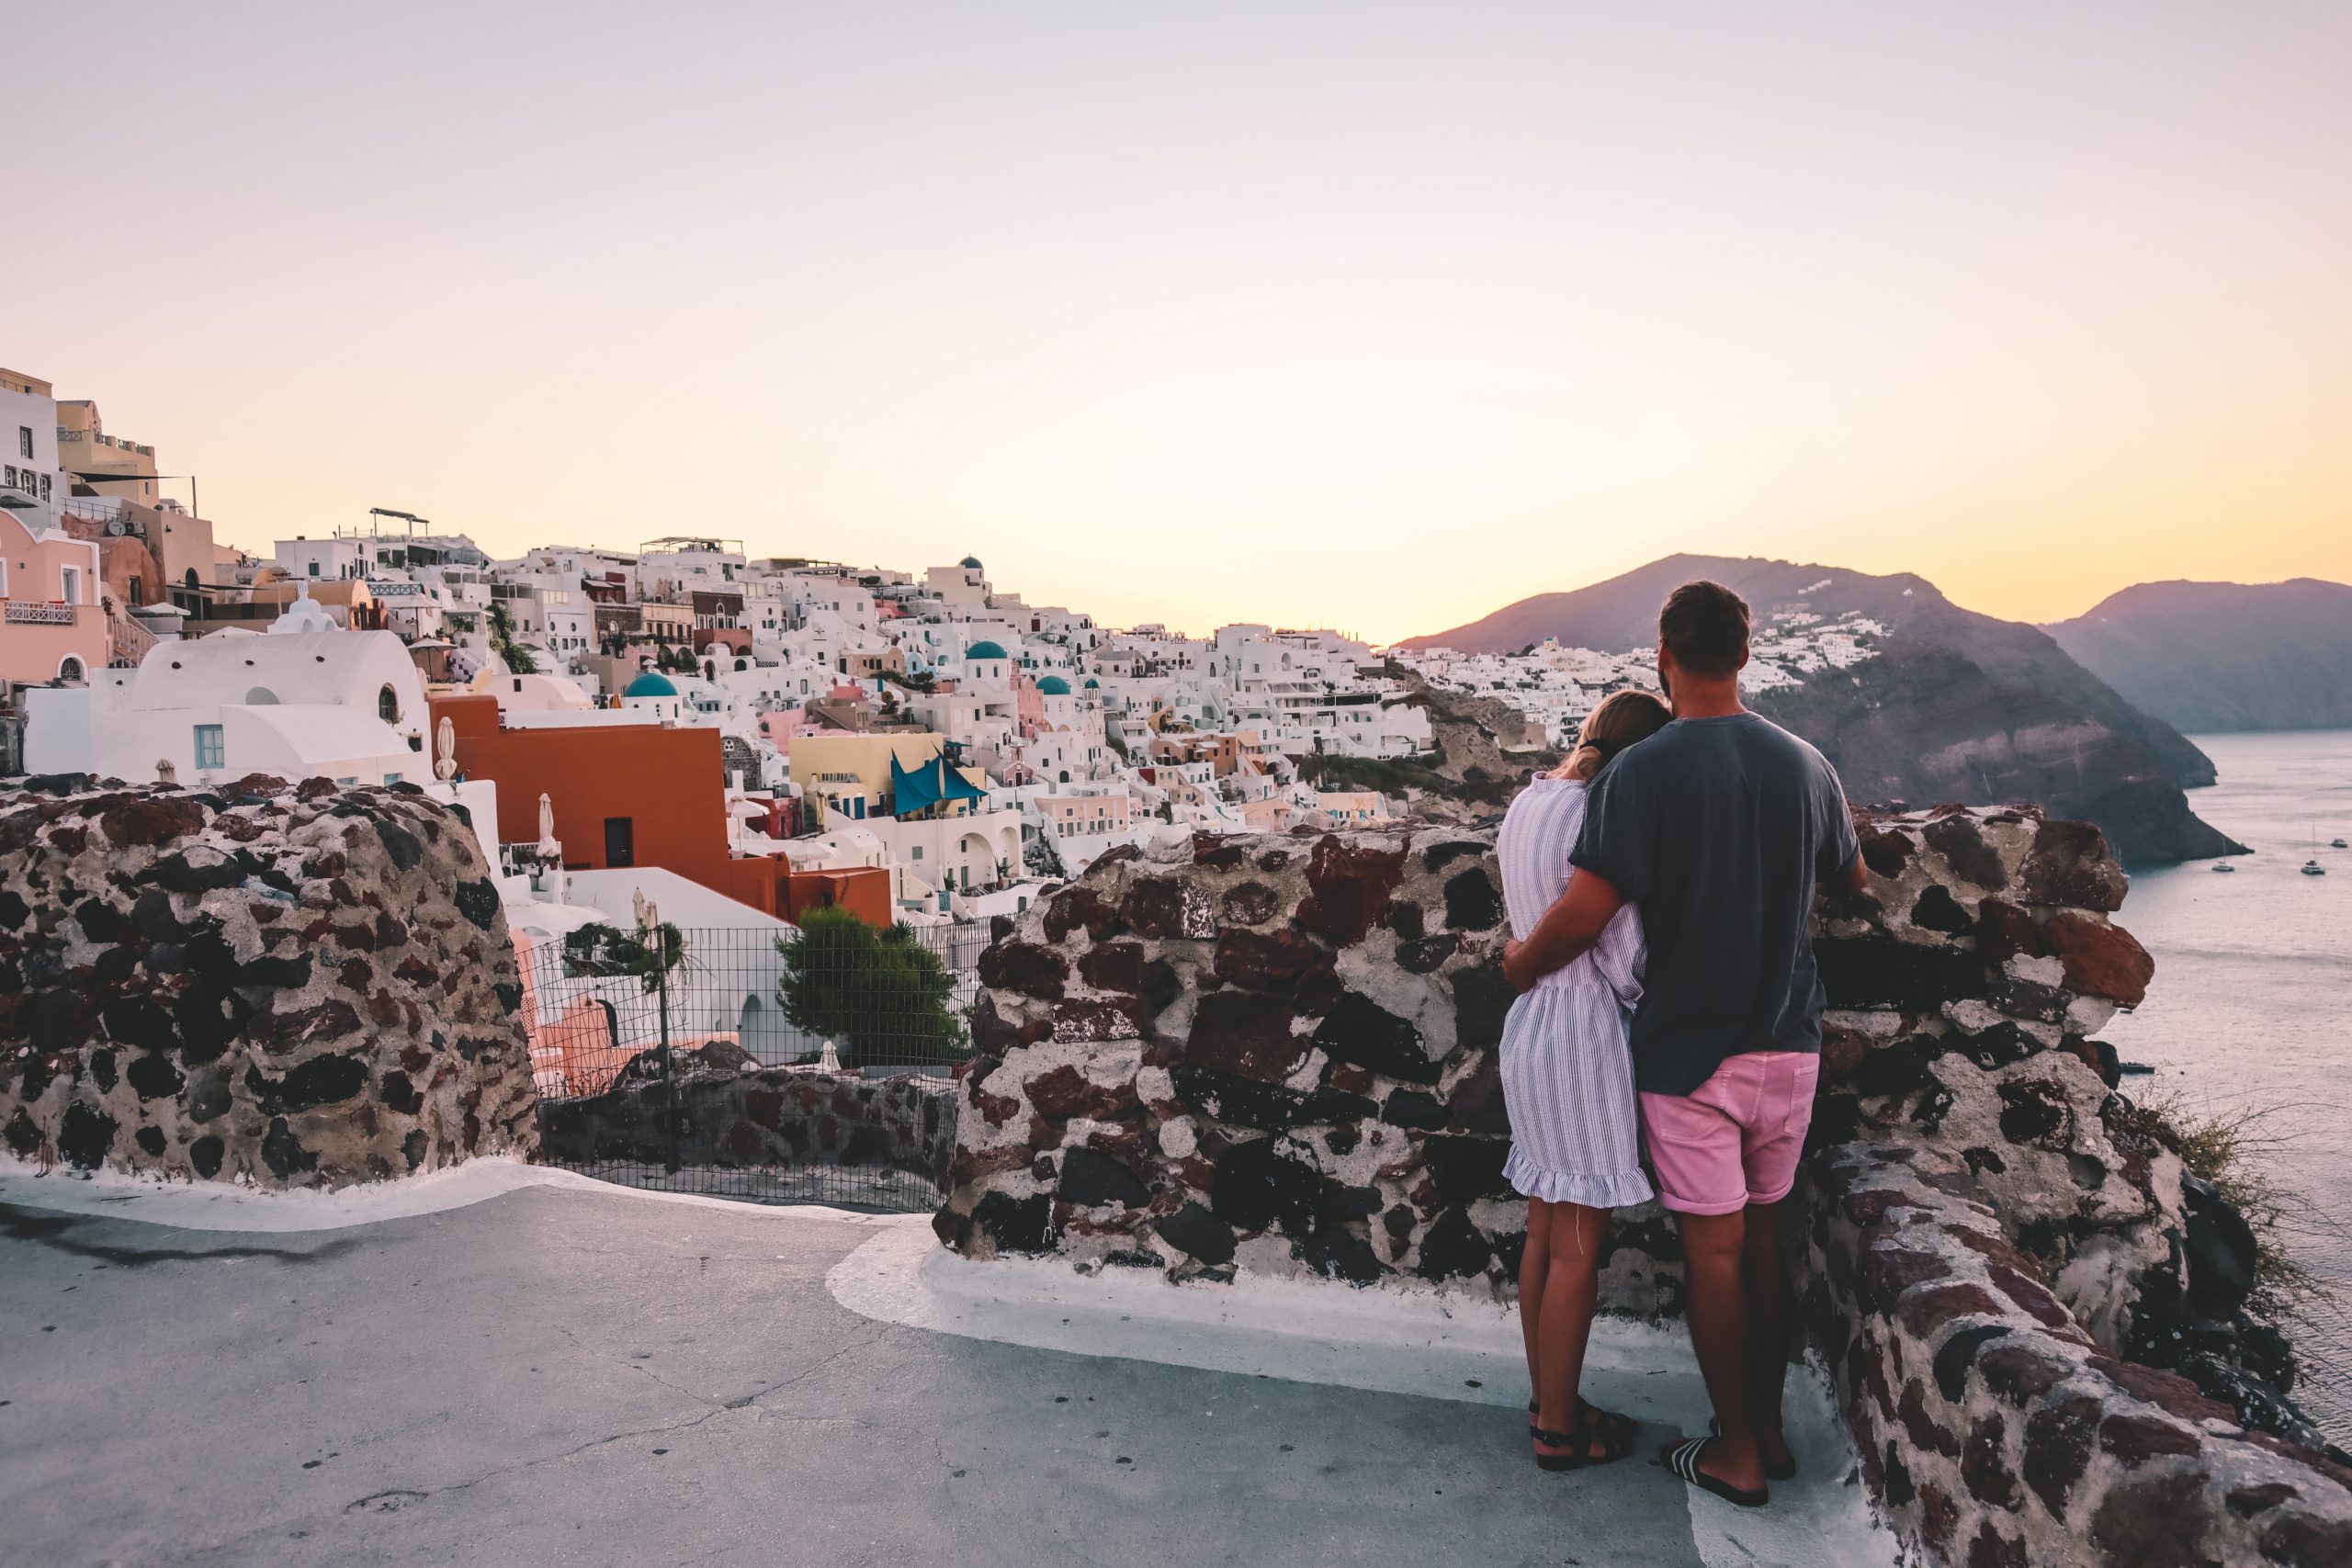 A couple stood watching the sunrise over Oia in Santorini.